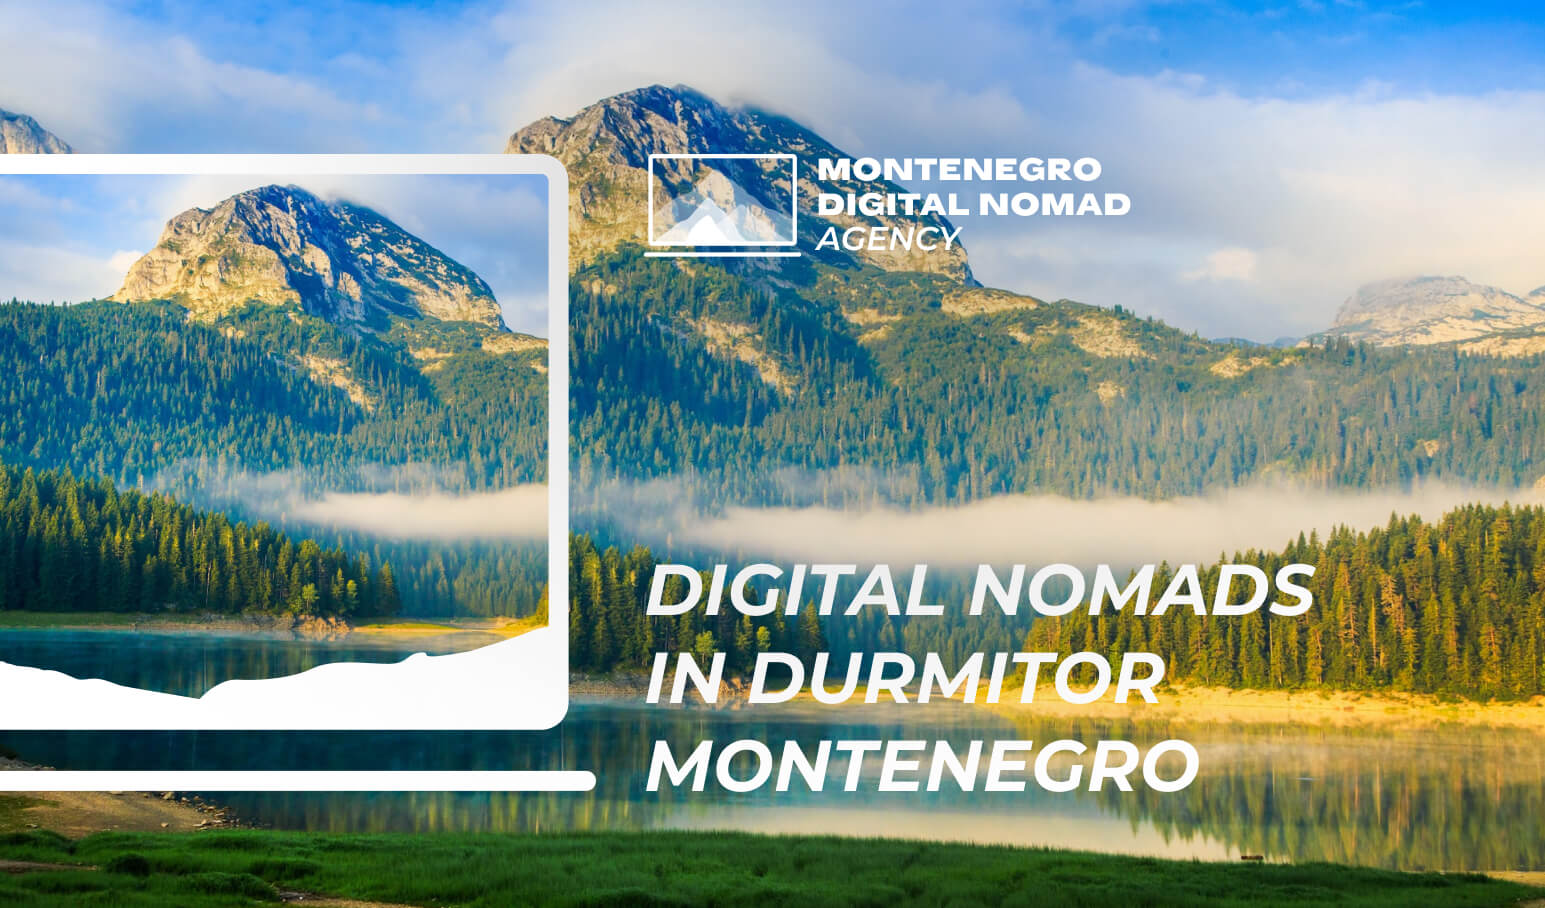 Image of Black Lake and Durmitor Mountain in Montenegro. Text overlay reads - Digital Nomads in Durmitor Montenegro